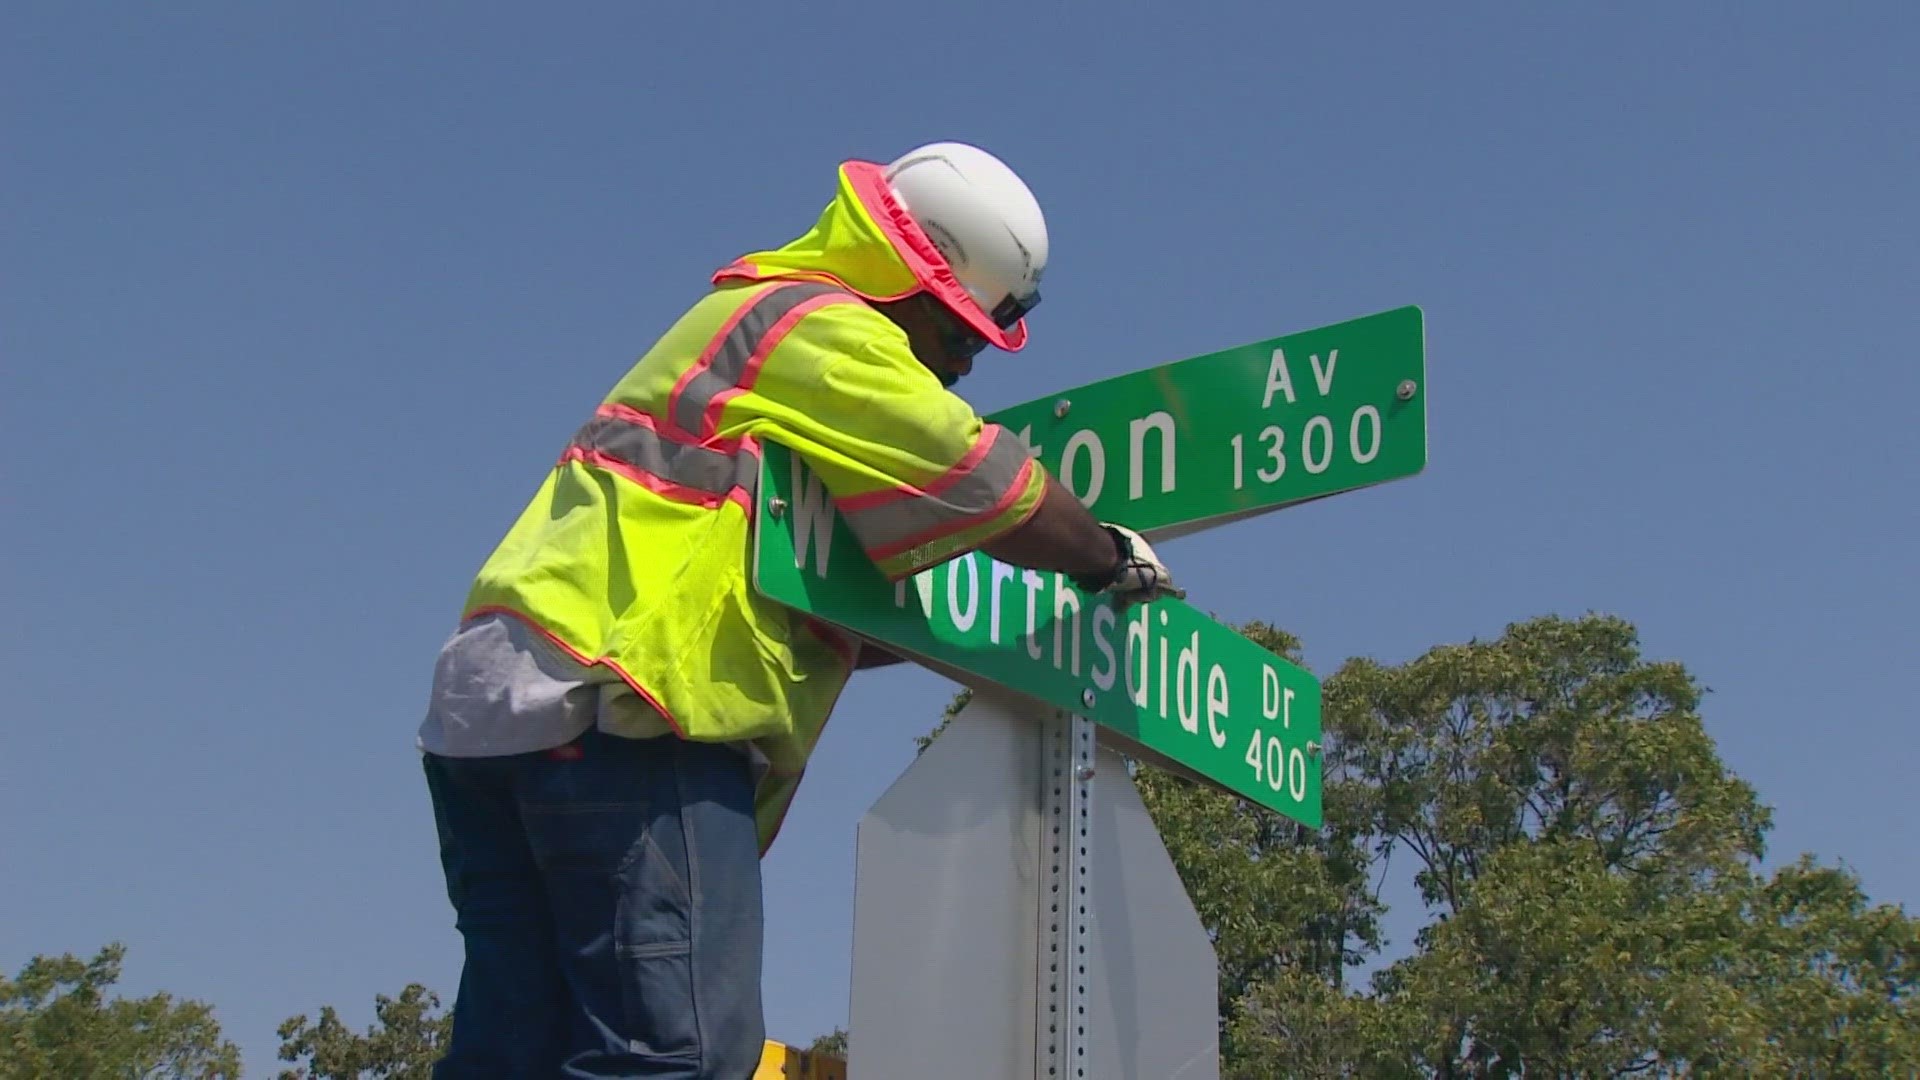 A city worker replaced a misspelled street sign soon after a photo of the error appeared on social media.